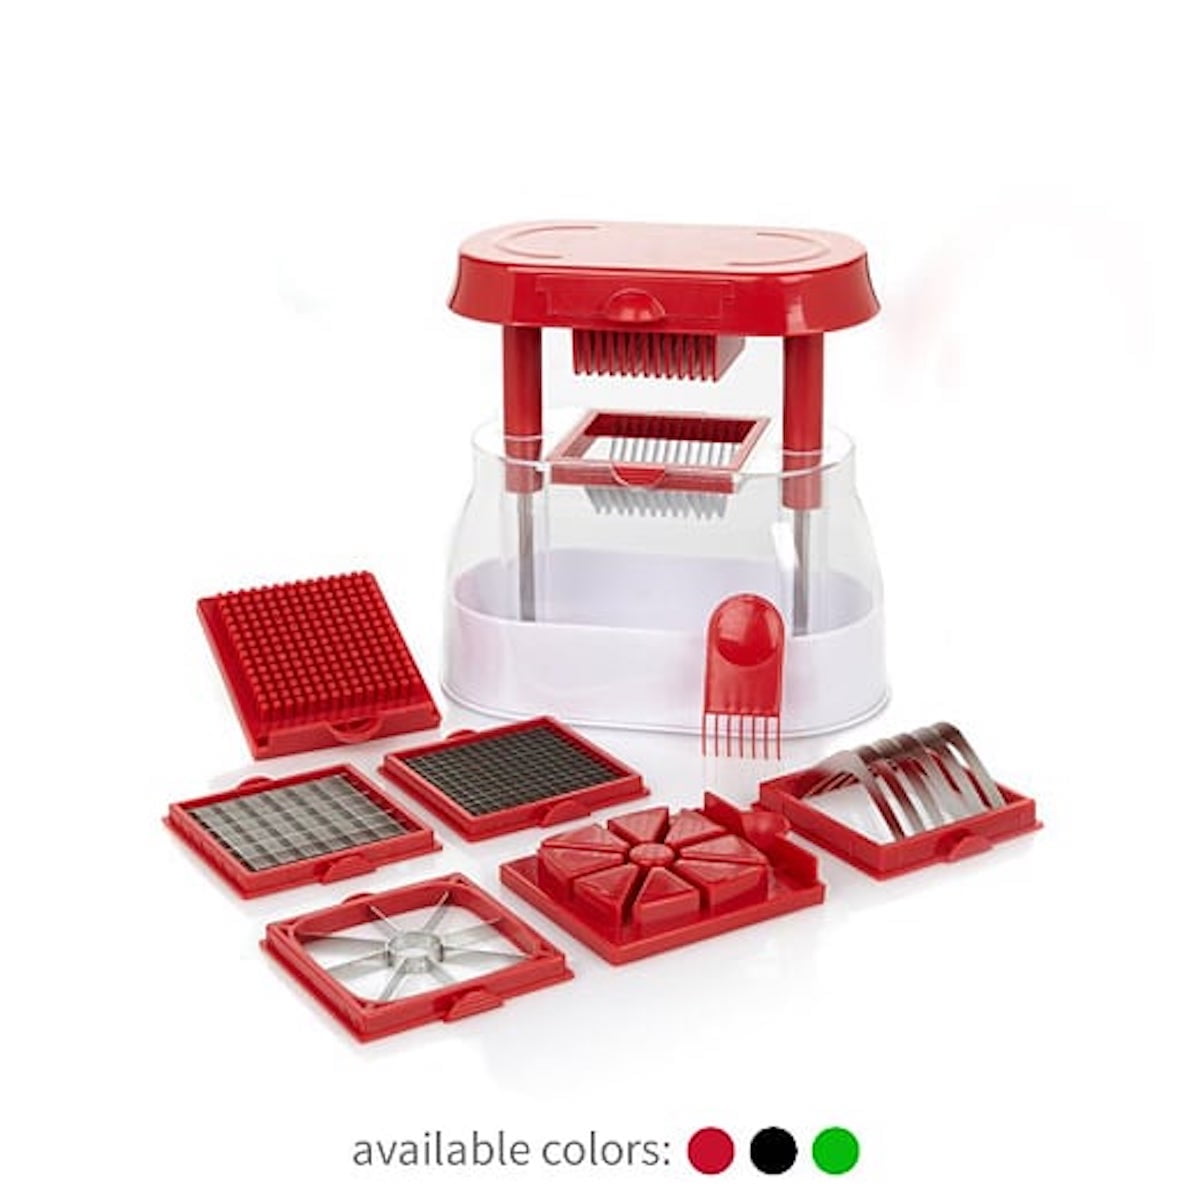 Ronco Veg-O-Matic Deluxe, Fruit and Vegetable Chopper, Dishwasher Safe(RED) 